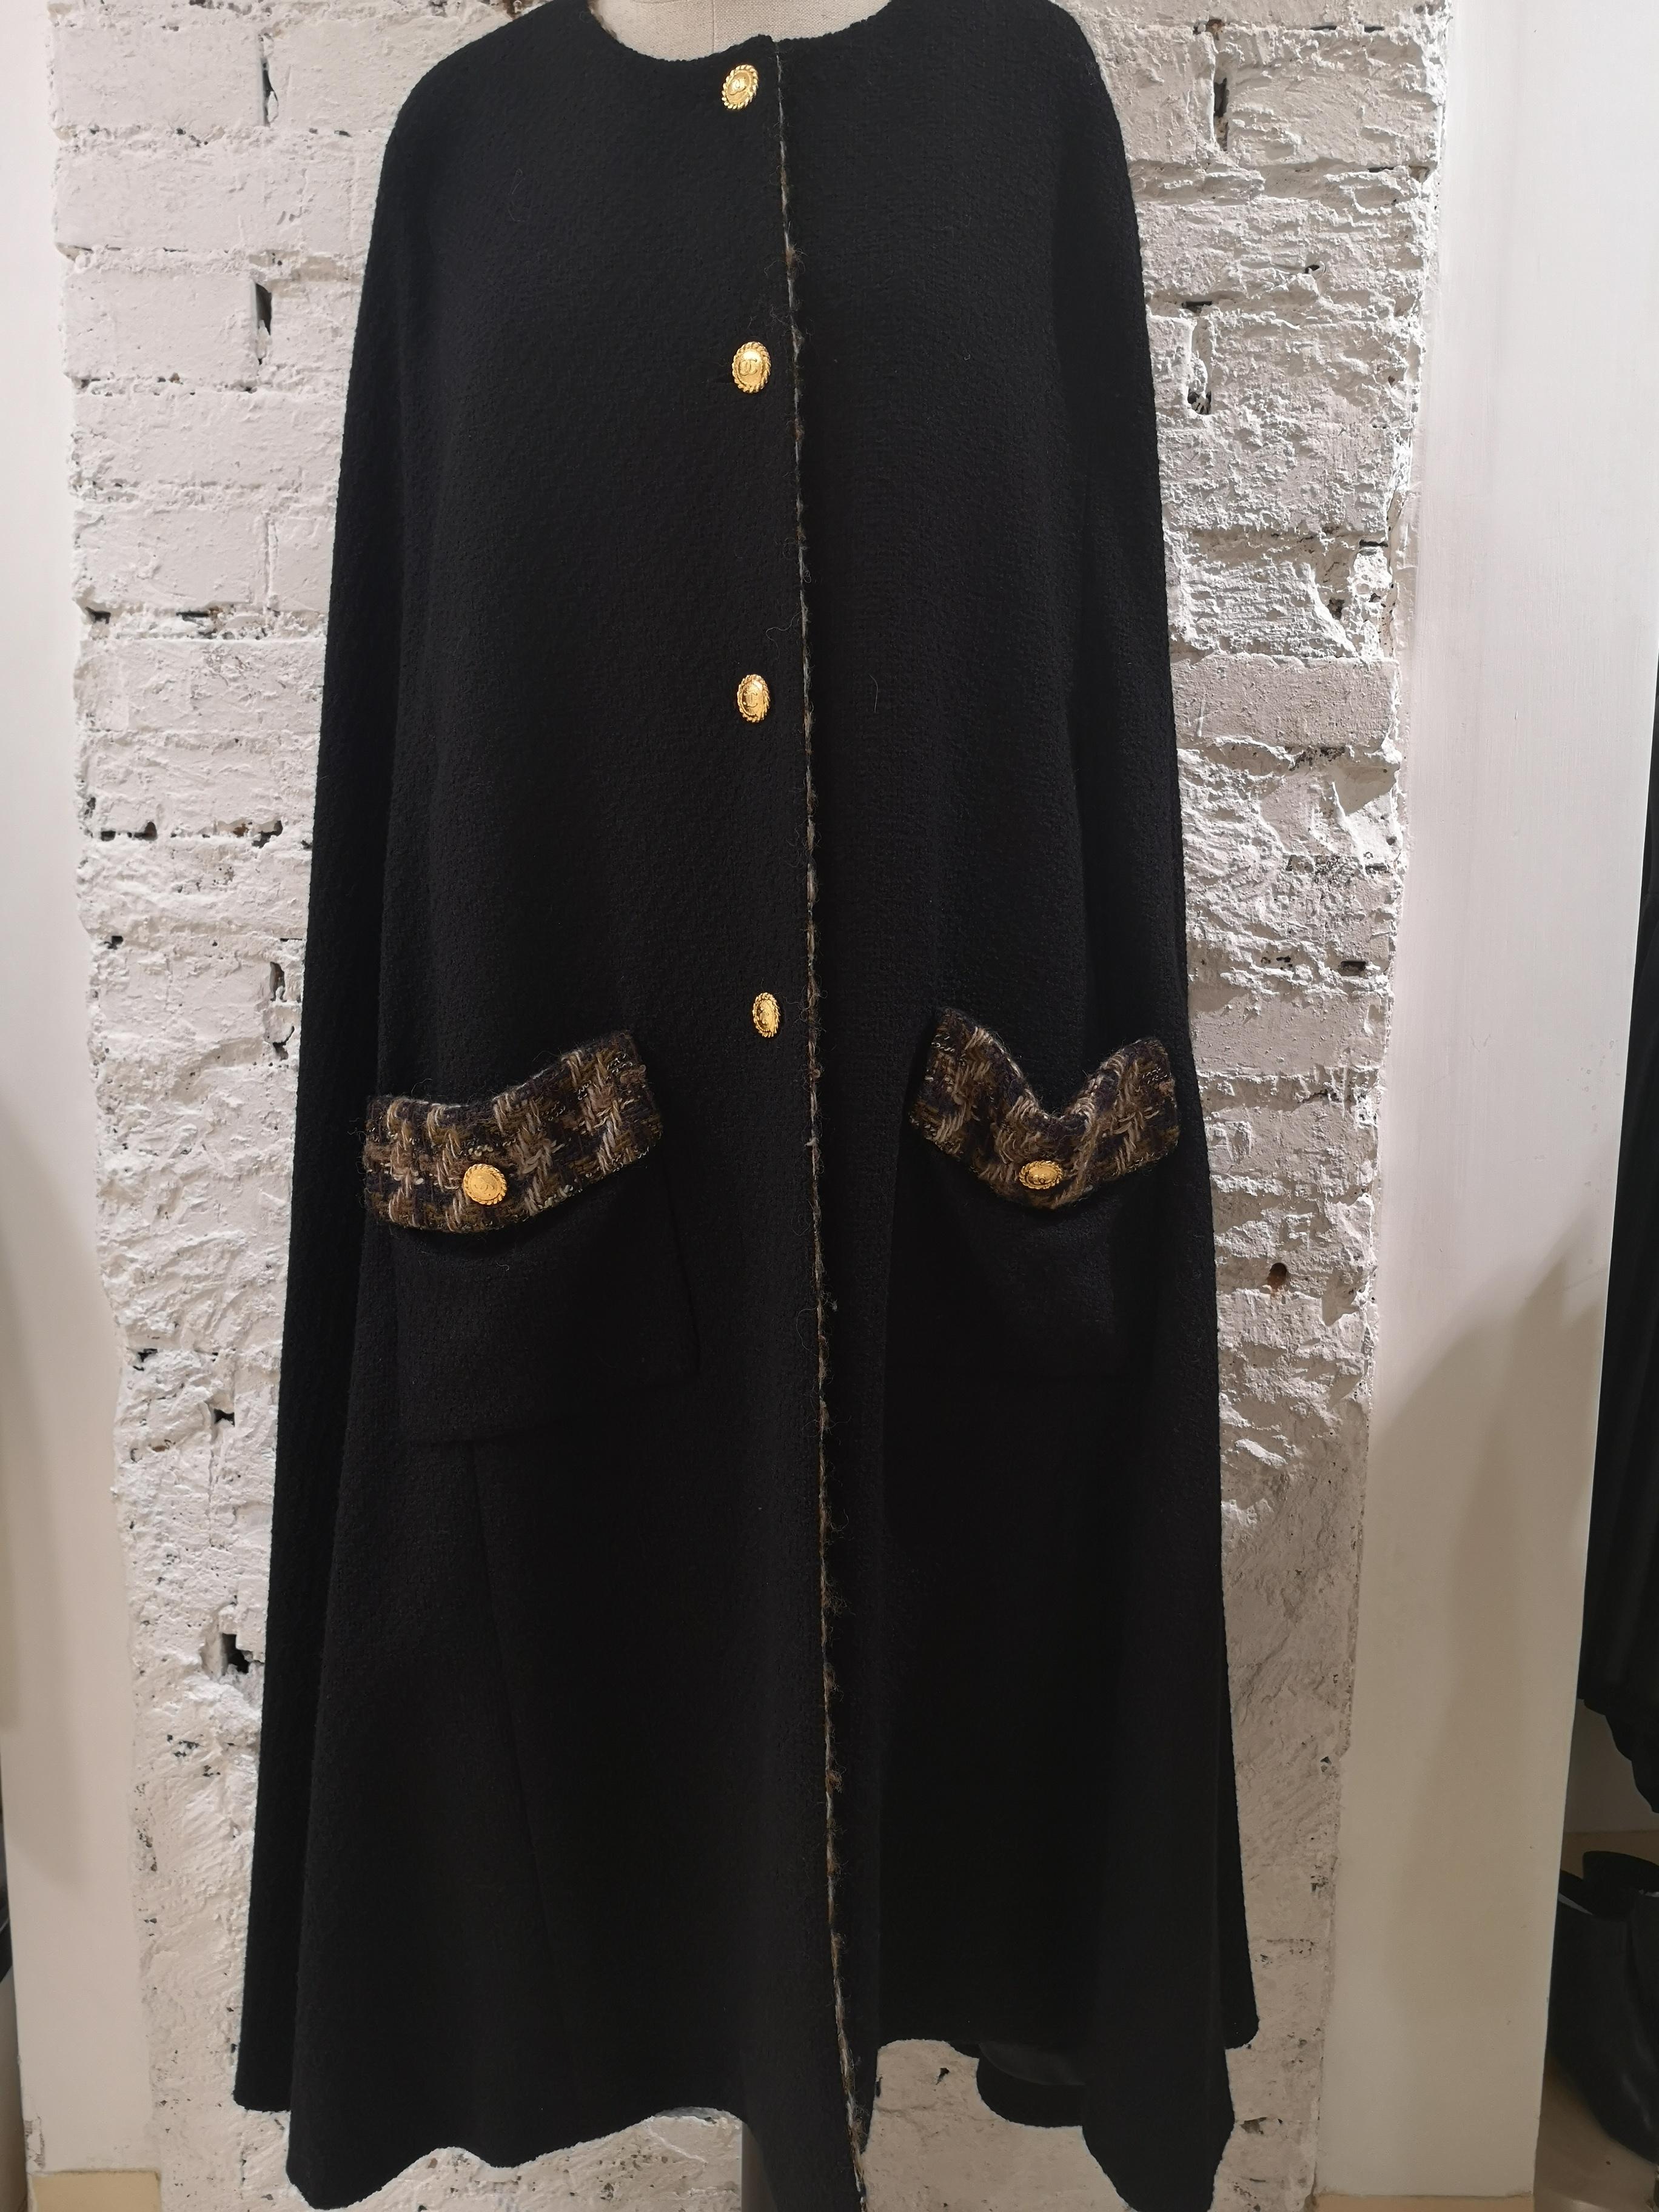 Chanel black wool and silk cape
A really vintage piece created bu Chanel boutique for Garkinckel's 
total lenght is 110 cm
embellished with gold tone CC logo bottons 
size marked 42